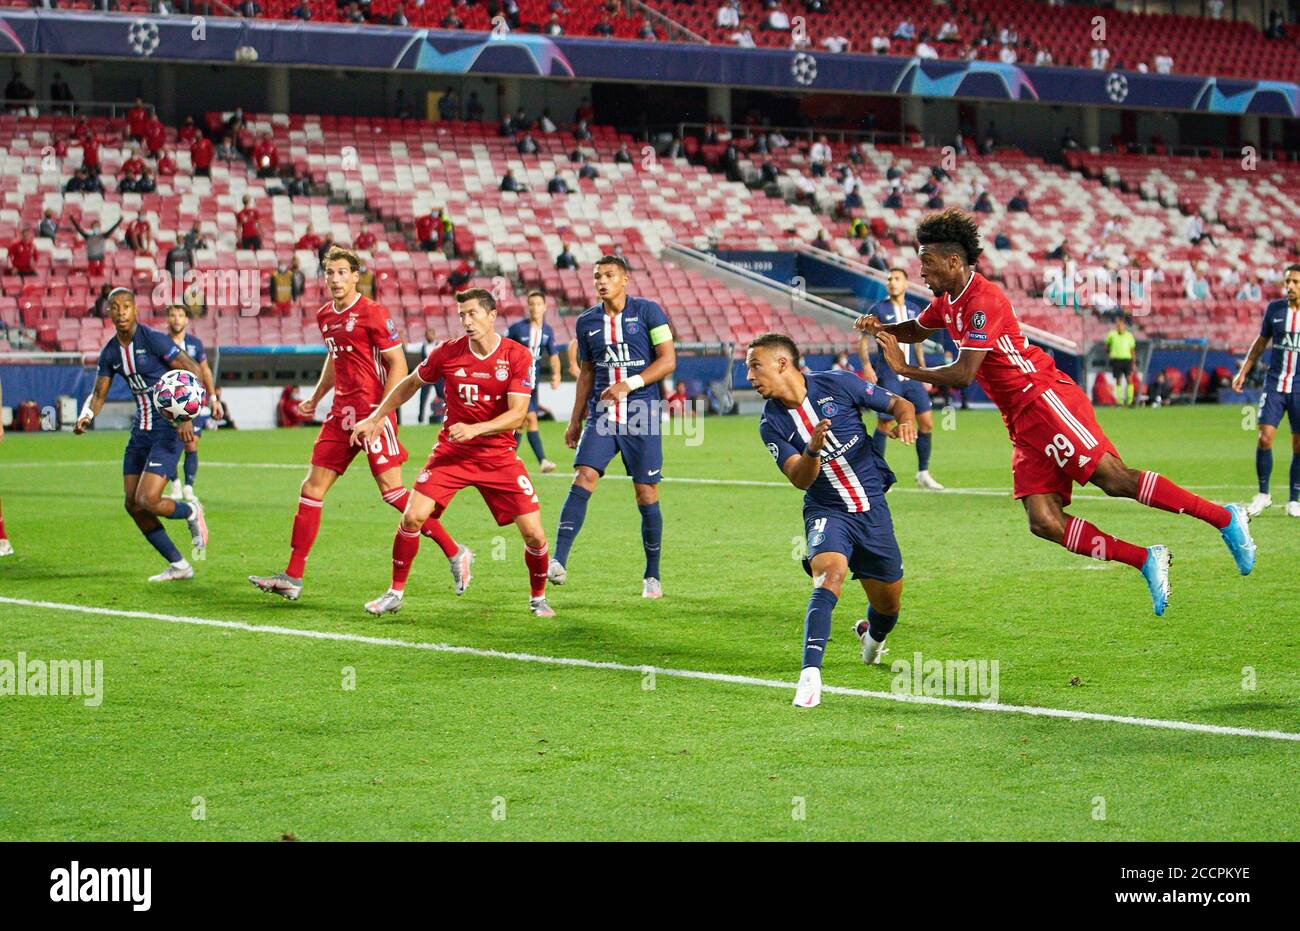 Lisbon, Lissabon, Portugal, 23rd August 2020.  Kingsley COMAN, FCB 29   scores, shoots goal for , Tor, Treffer, 1-0 against Thilo KEHRER, PSG 4 , Robert LEWANDOWSKI, FCB 9 Thiago SILVA, PSG 2 Leon GORETZKA, FCB 18  watch in the final match UEFA Champions League, final tournament FC BAYERN MUENCHEN - PARIS ST. GERMAIN (PSG) 1-0 in season 2019/2020, FCB,  © Peter Schatz / Alamy Live News / Pool   - UEFA REGULATIONS PROHIBIT ANY USE OF PHOTOGRAPHS as IMAGE SEQUENCES and/or QUASI-VIDEO -  National and international News-Agencies OUT Editorial Use ONLY Stock Photo